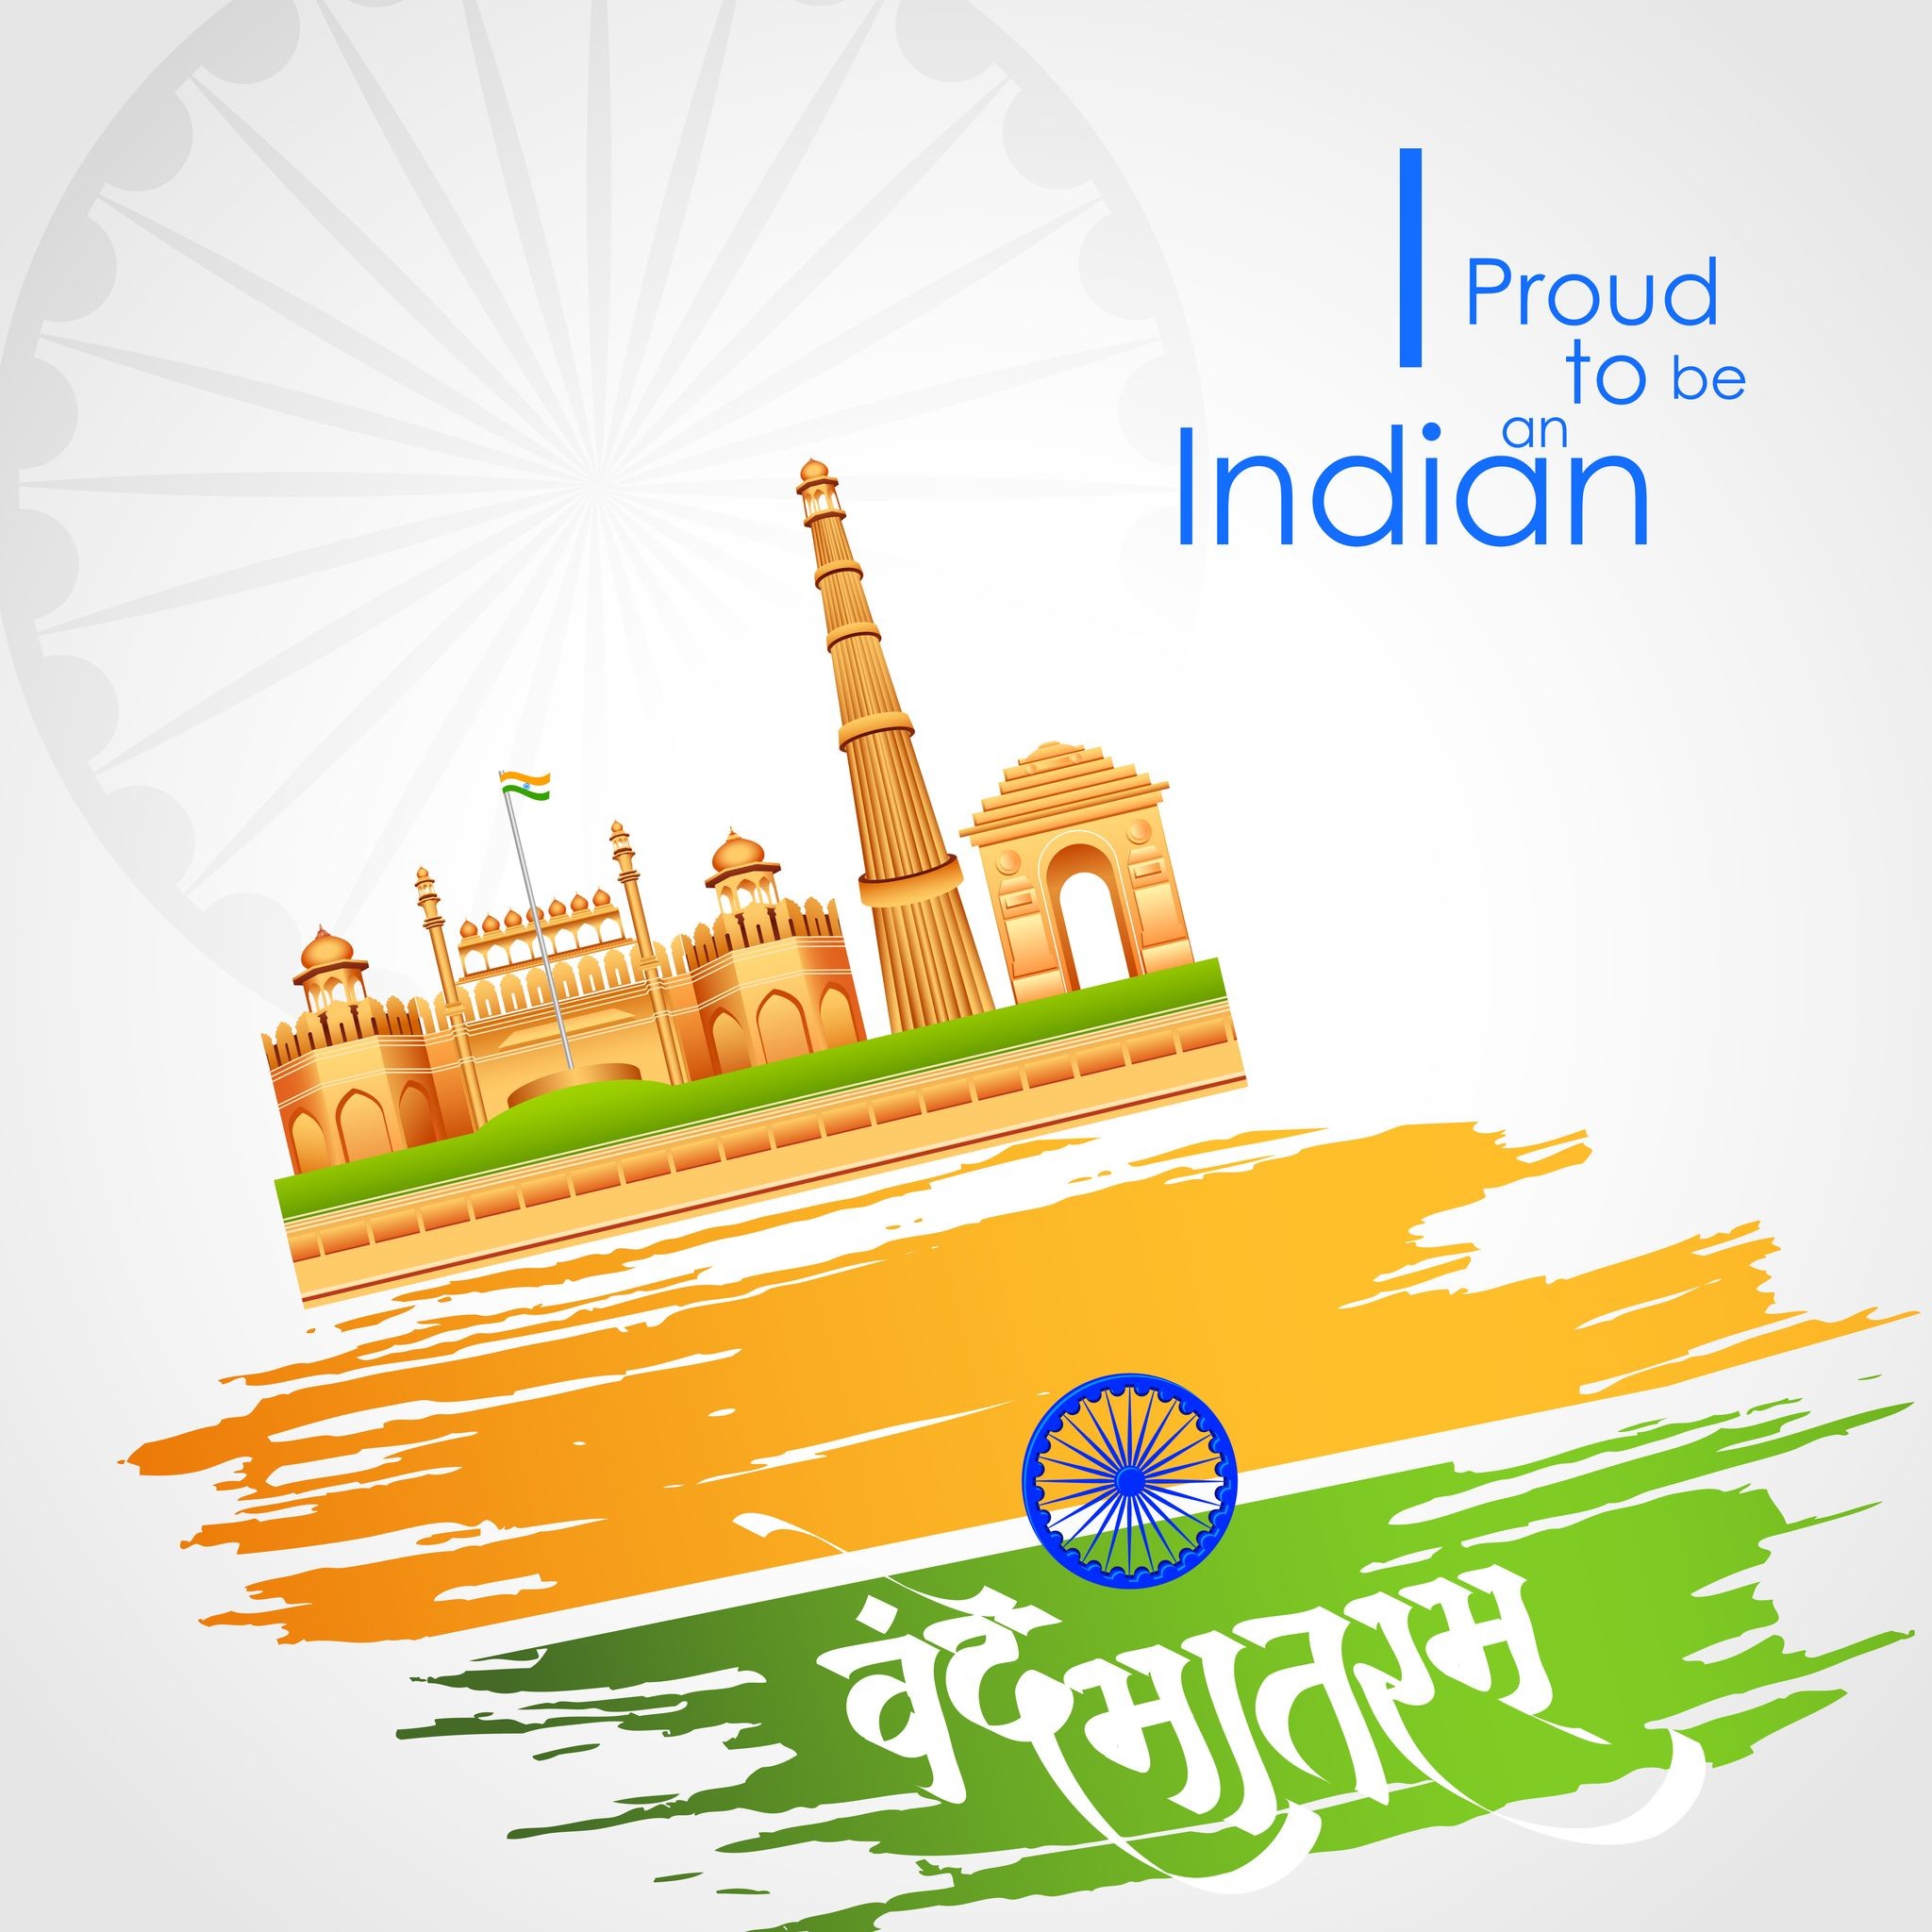 2048x2048 Indian Flag, Indian Independence Day, High Quality Images, Hd Wallpaper,  Wallpapers, Tips, Android, Scrap